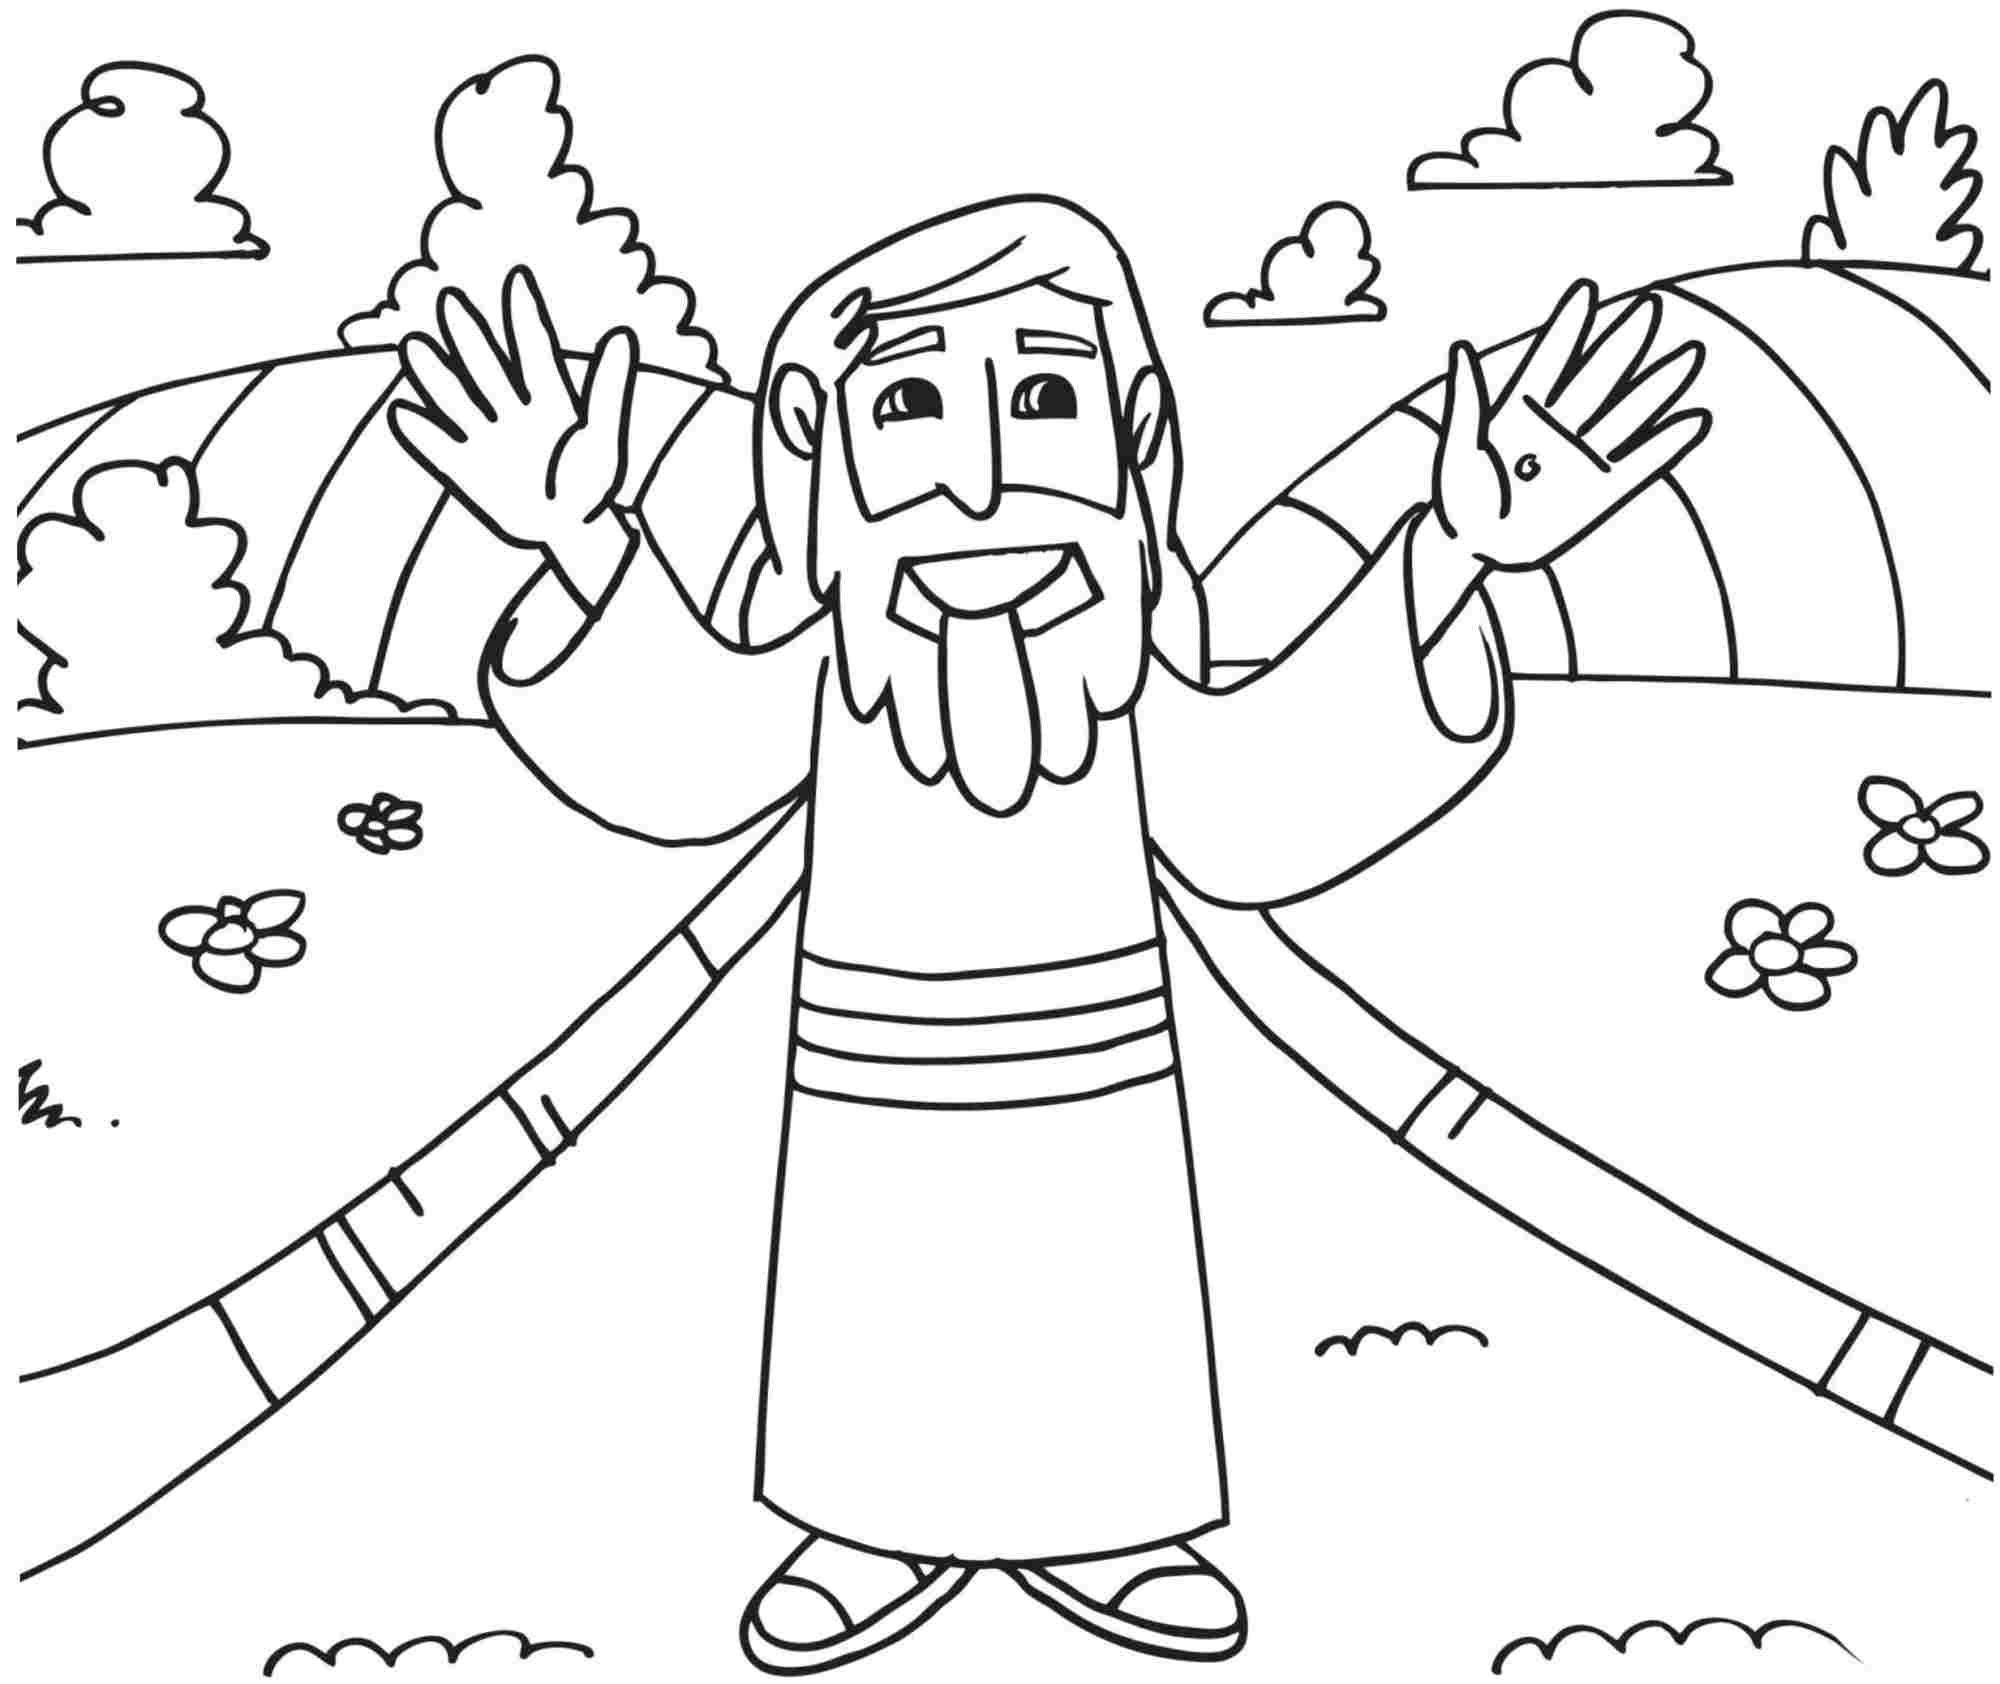 Christianity Coloring Pages - Coloring Home